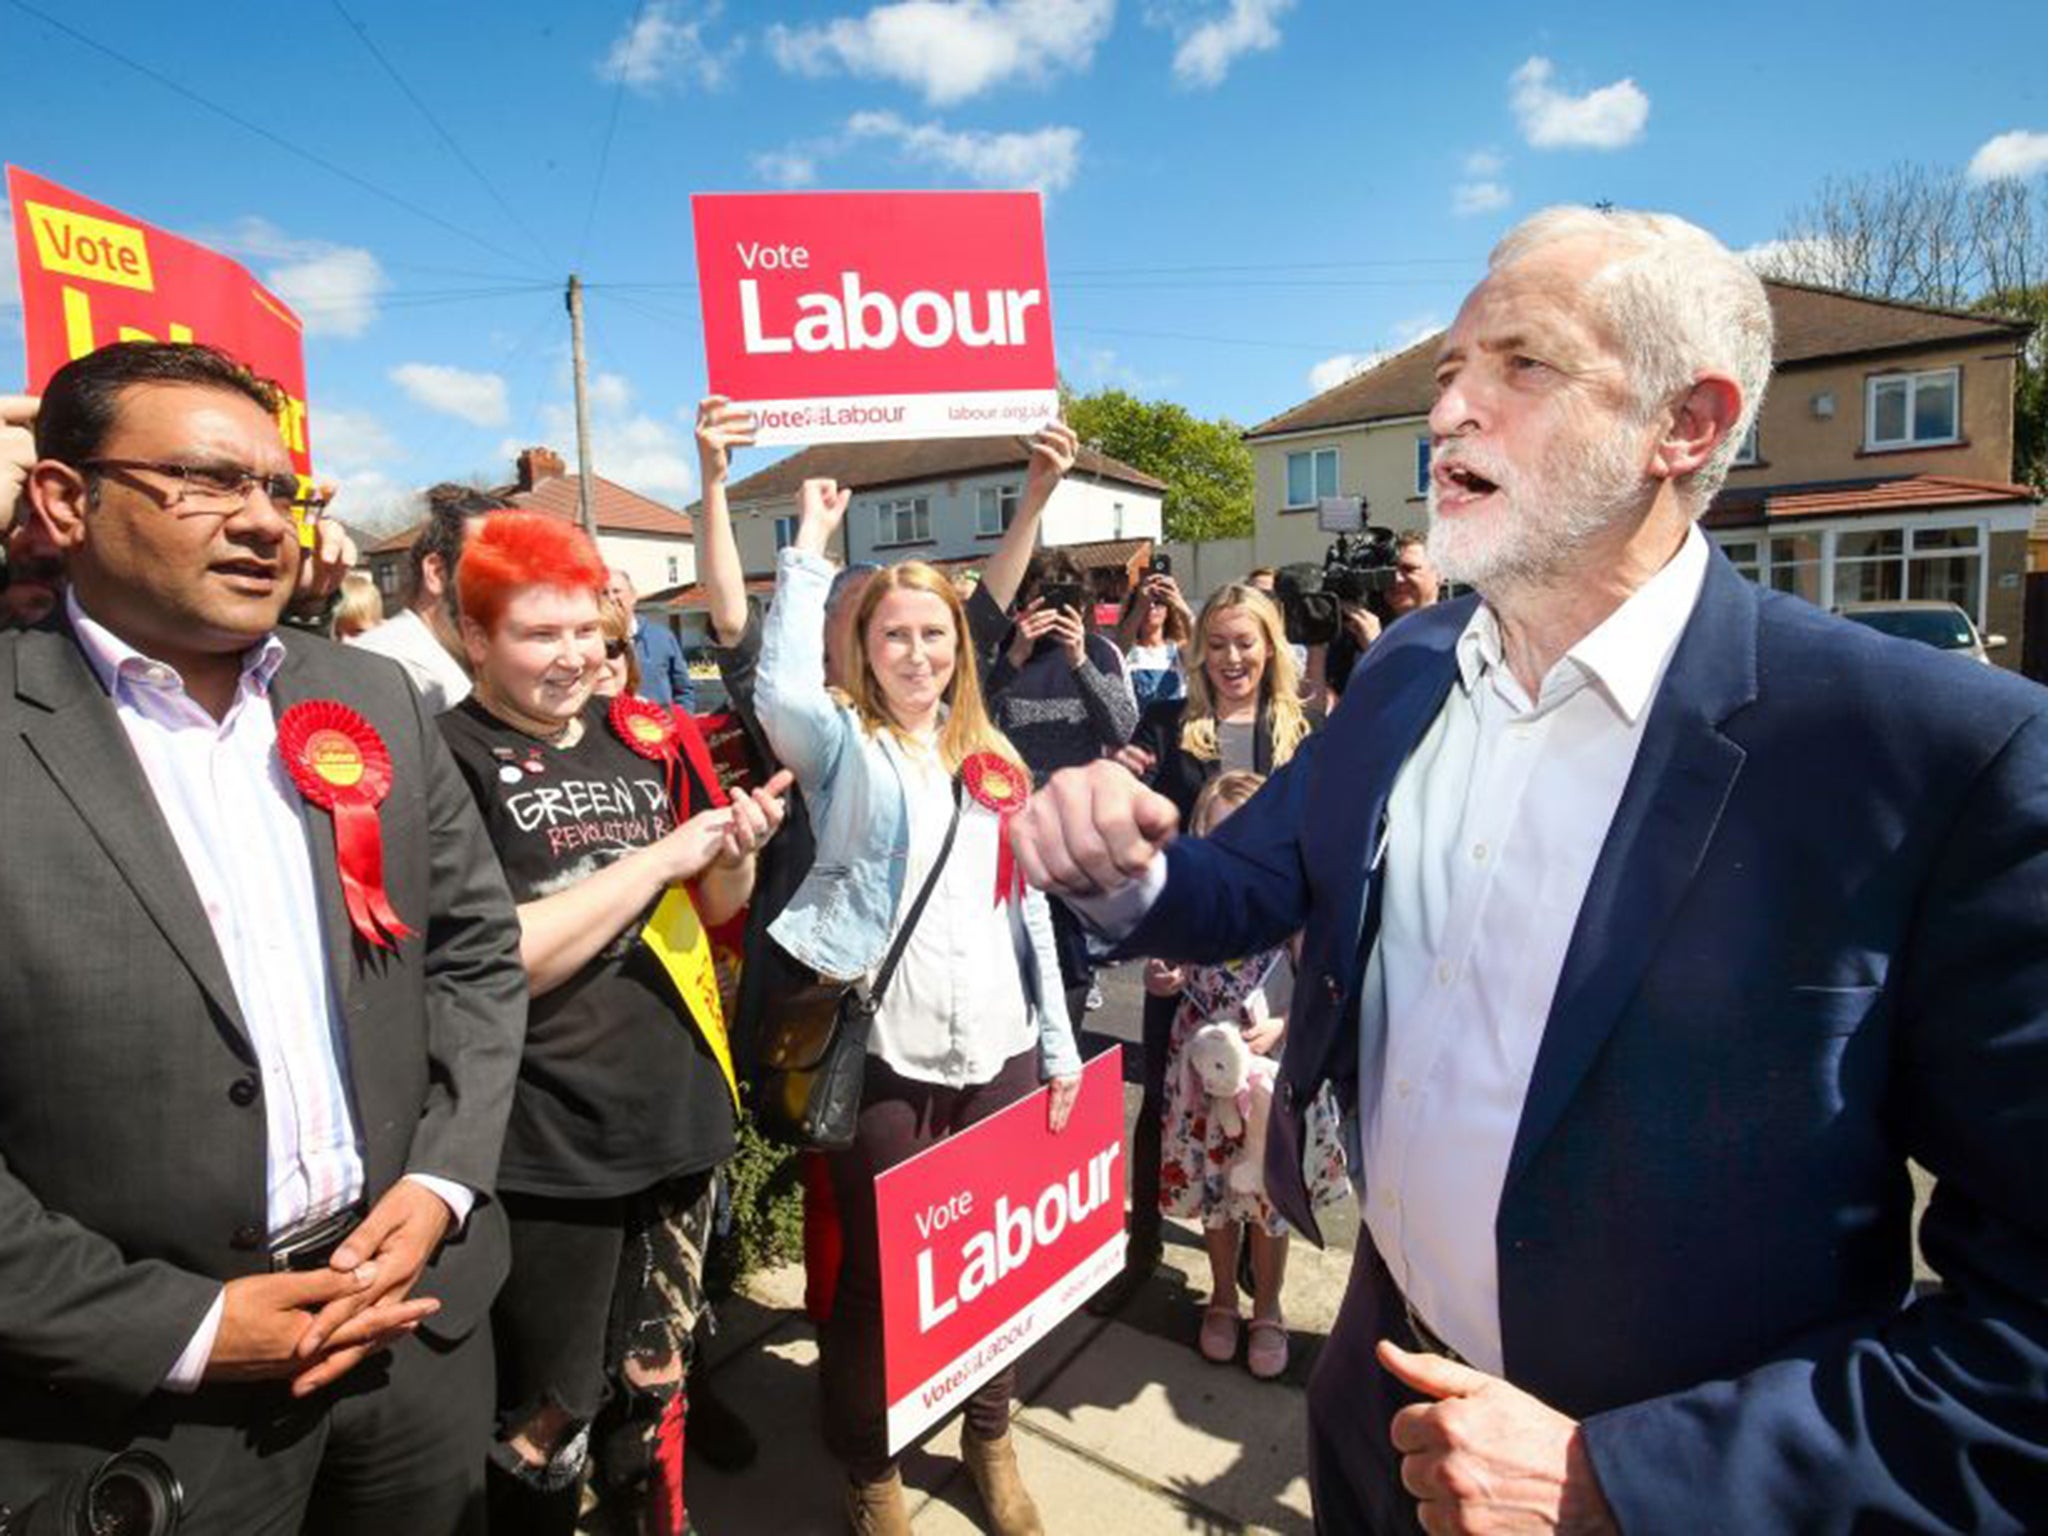 Labour leader Jeremy Corbyn on the general election campaign trail in Warrington